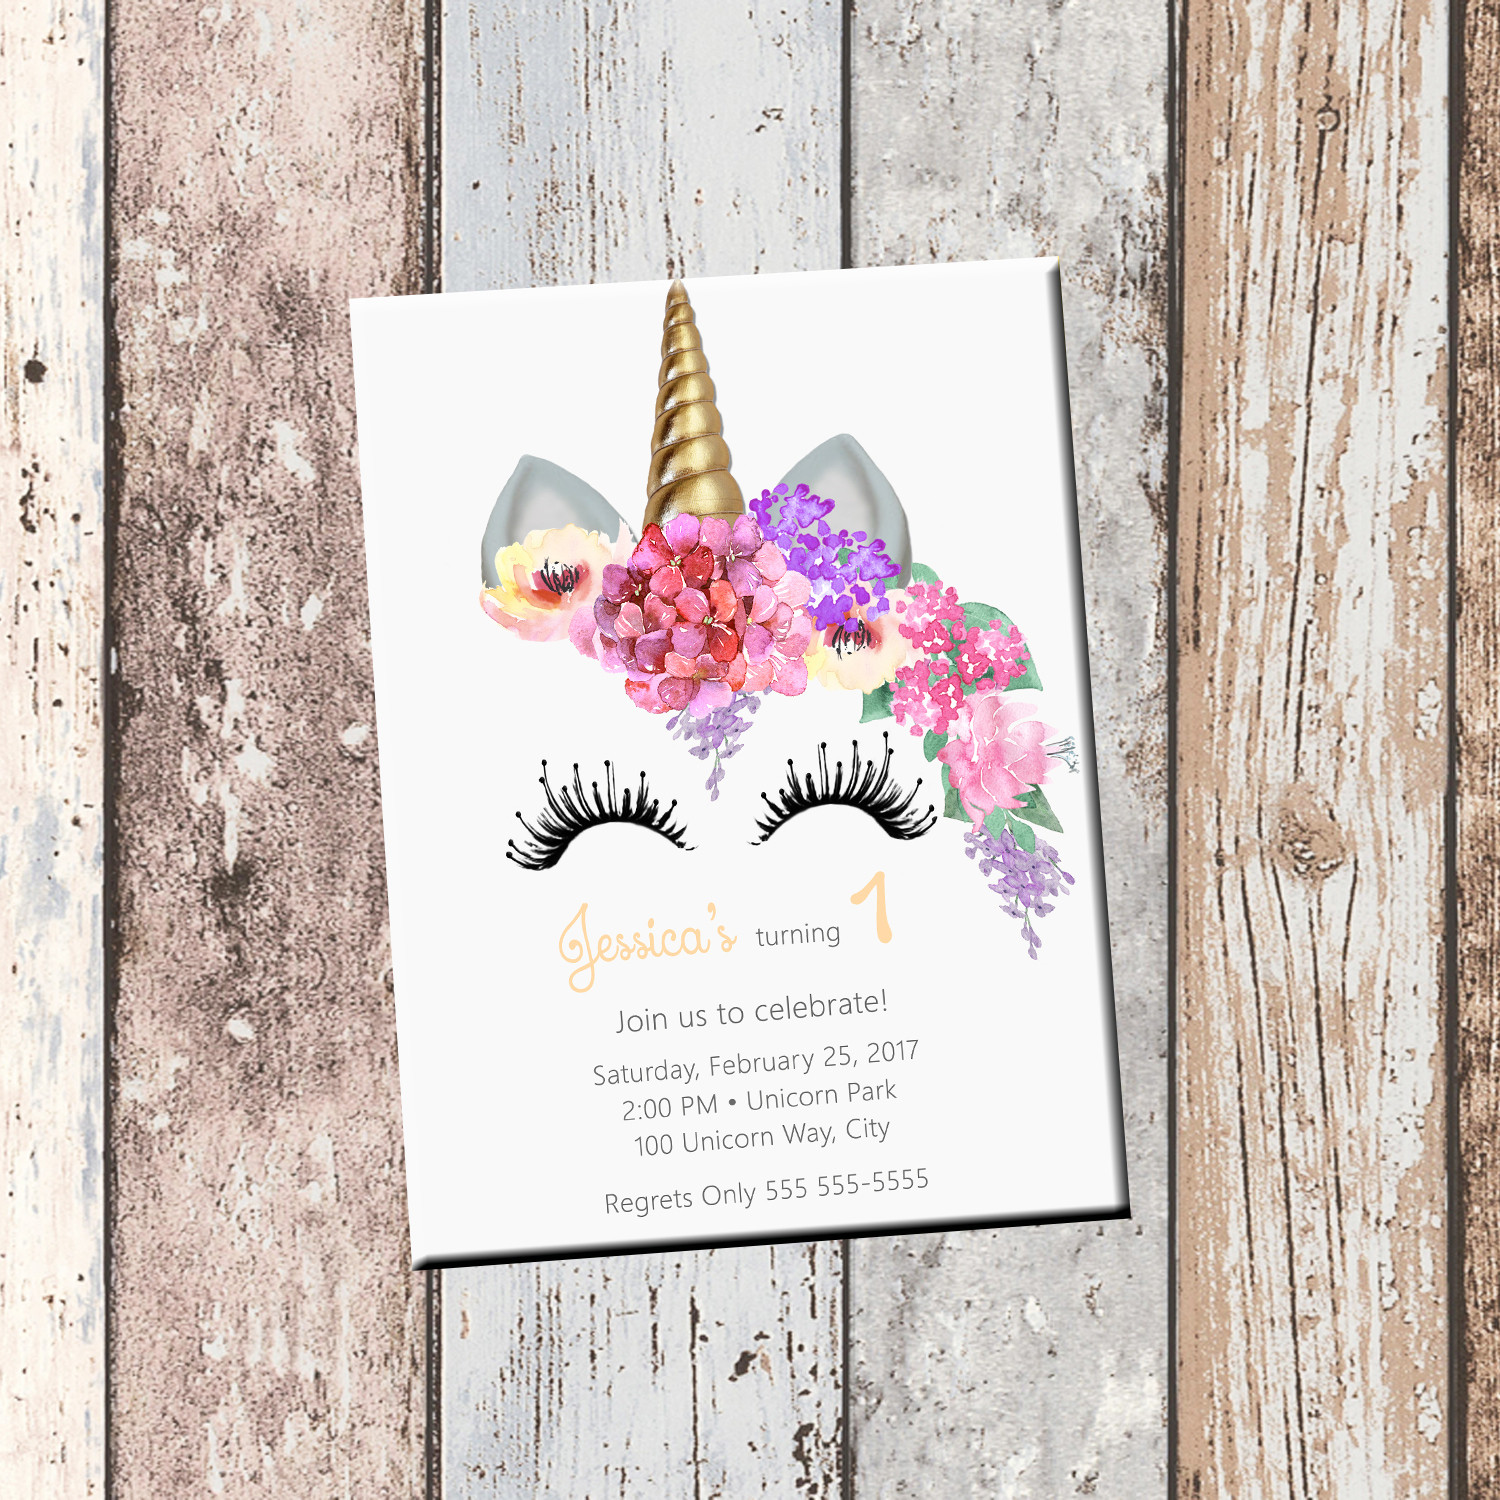 Personalized Birthday Party Invitations
 Unicorn Birthday Personalized Invitation 1 Sided Birthday